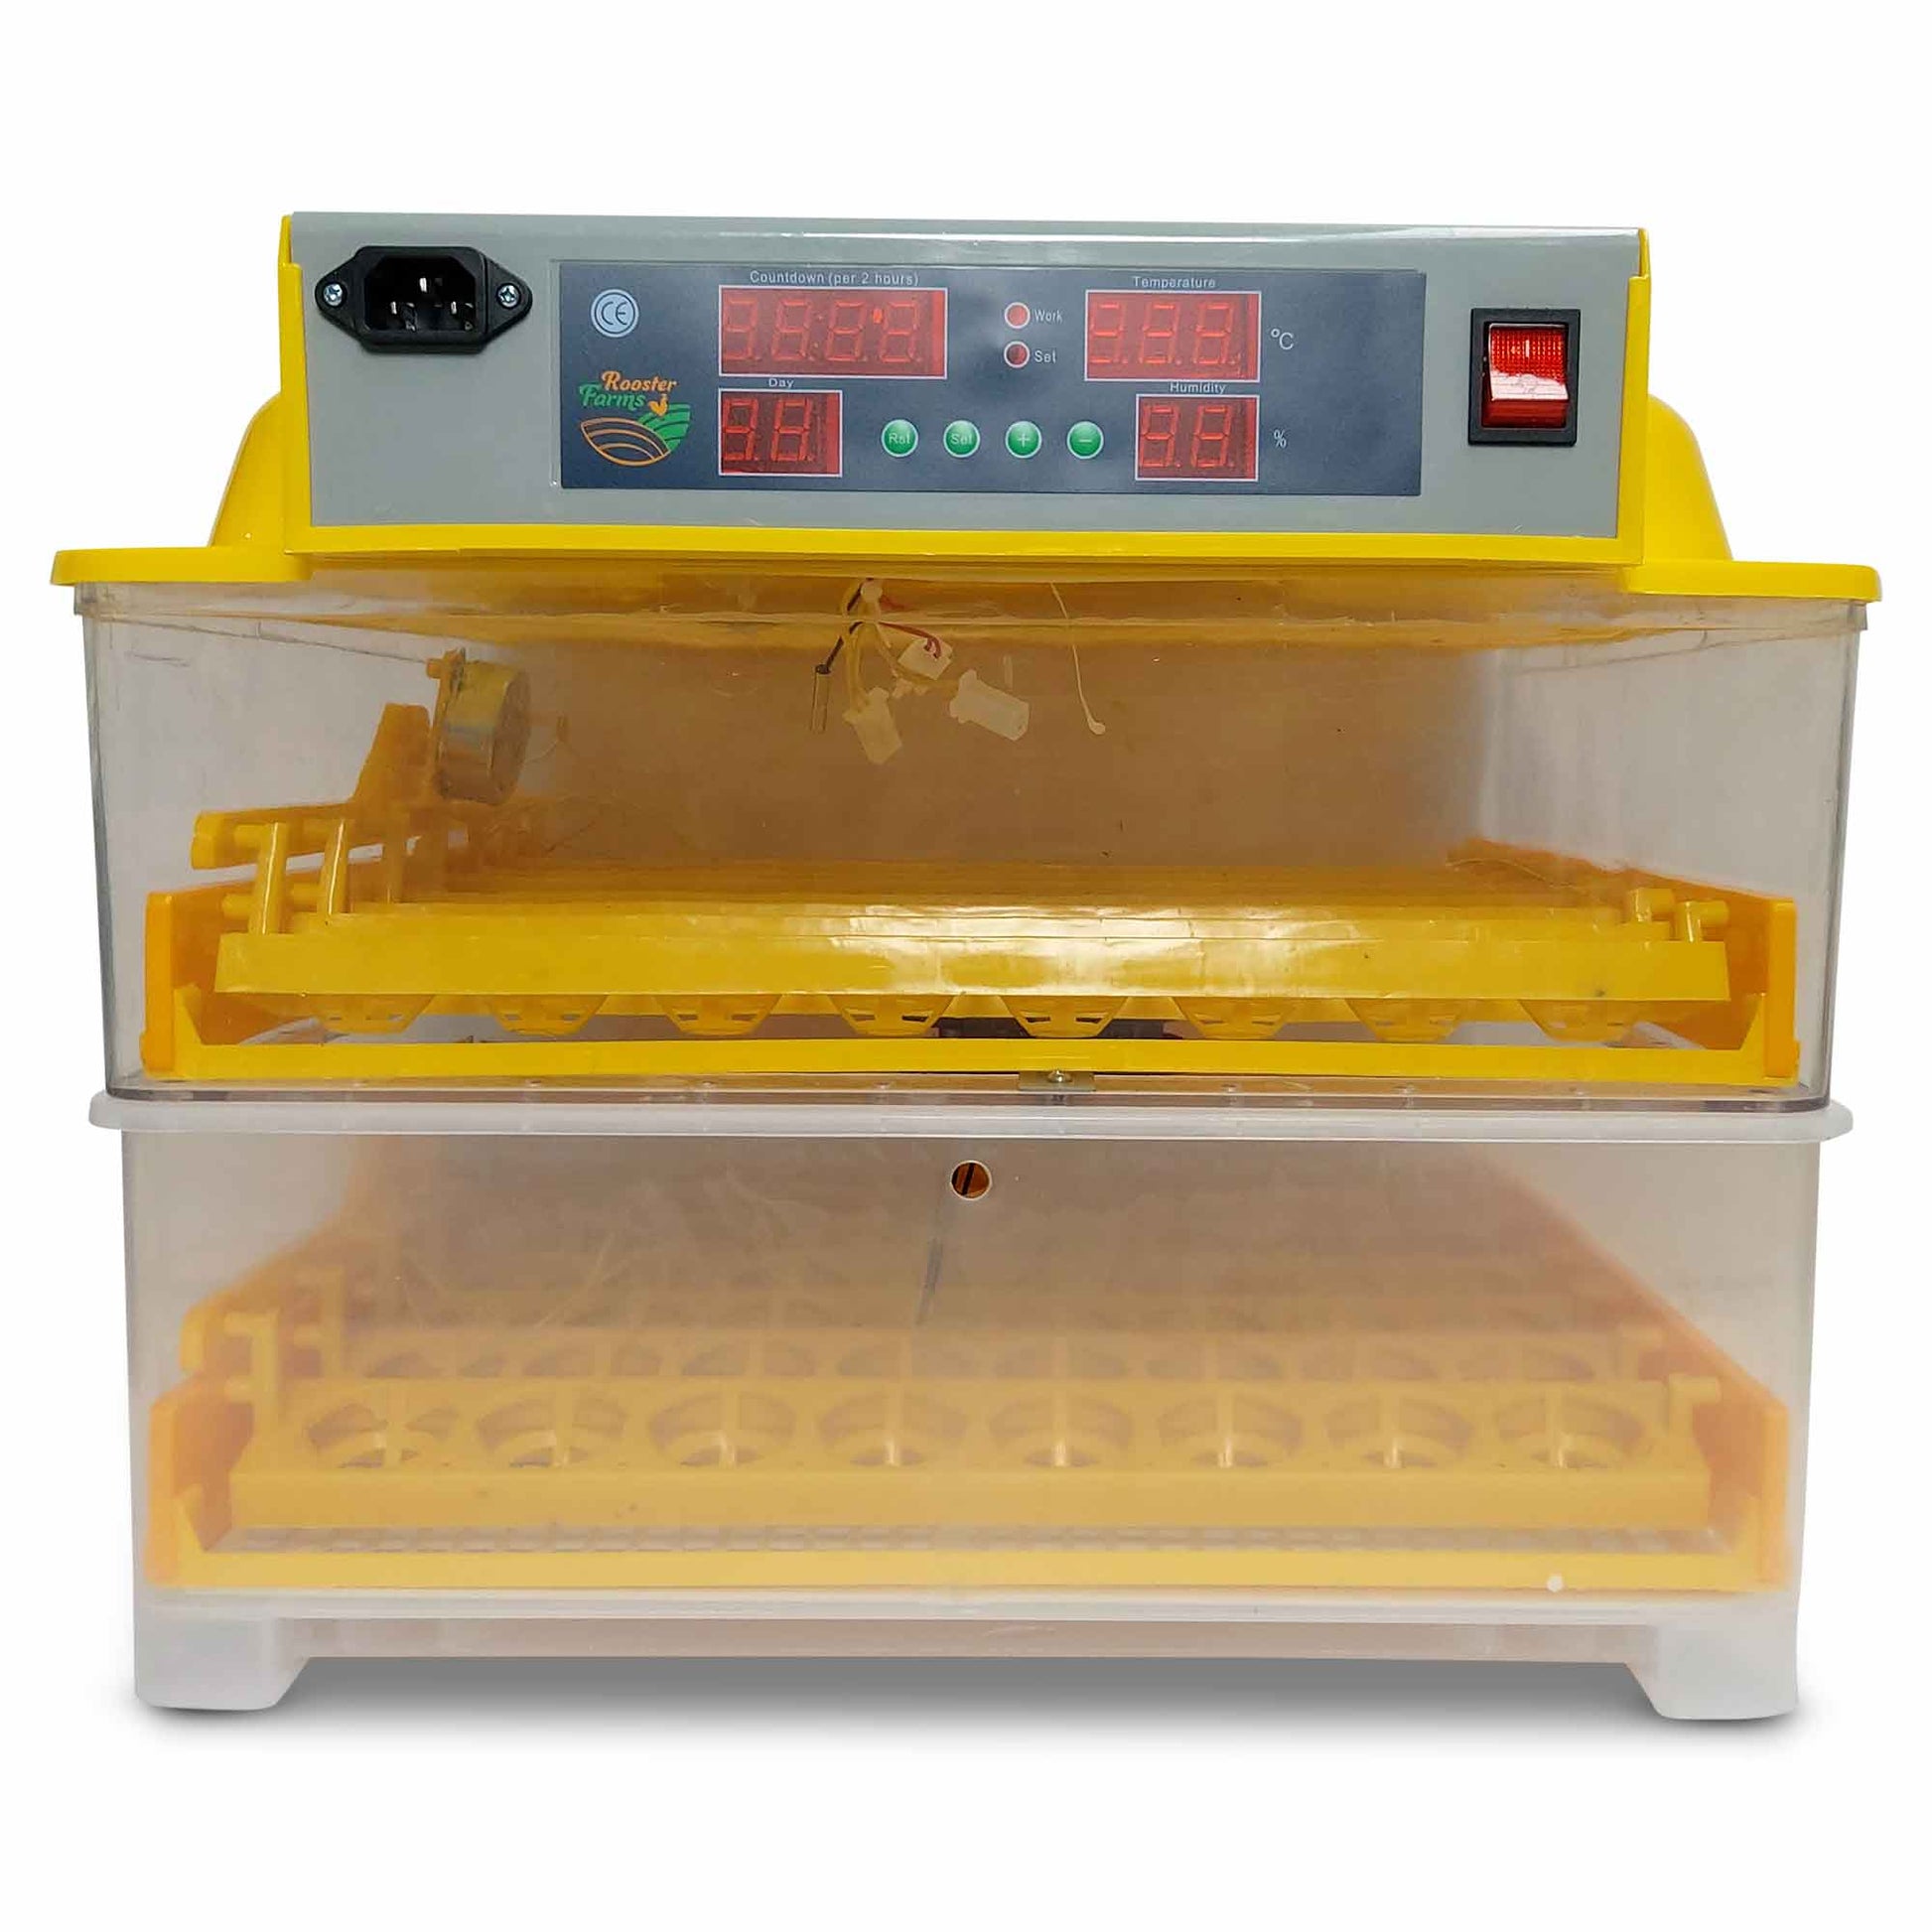 Electric 112 Egg Incubator + Accessories Hatching Eggs Chicken Quail Duck